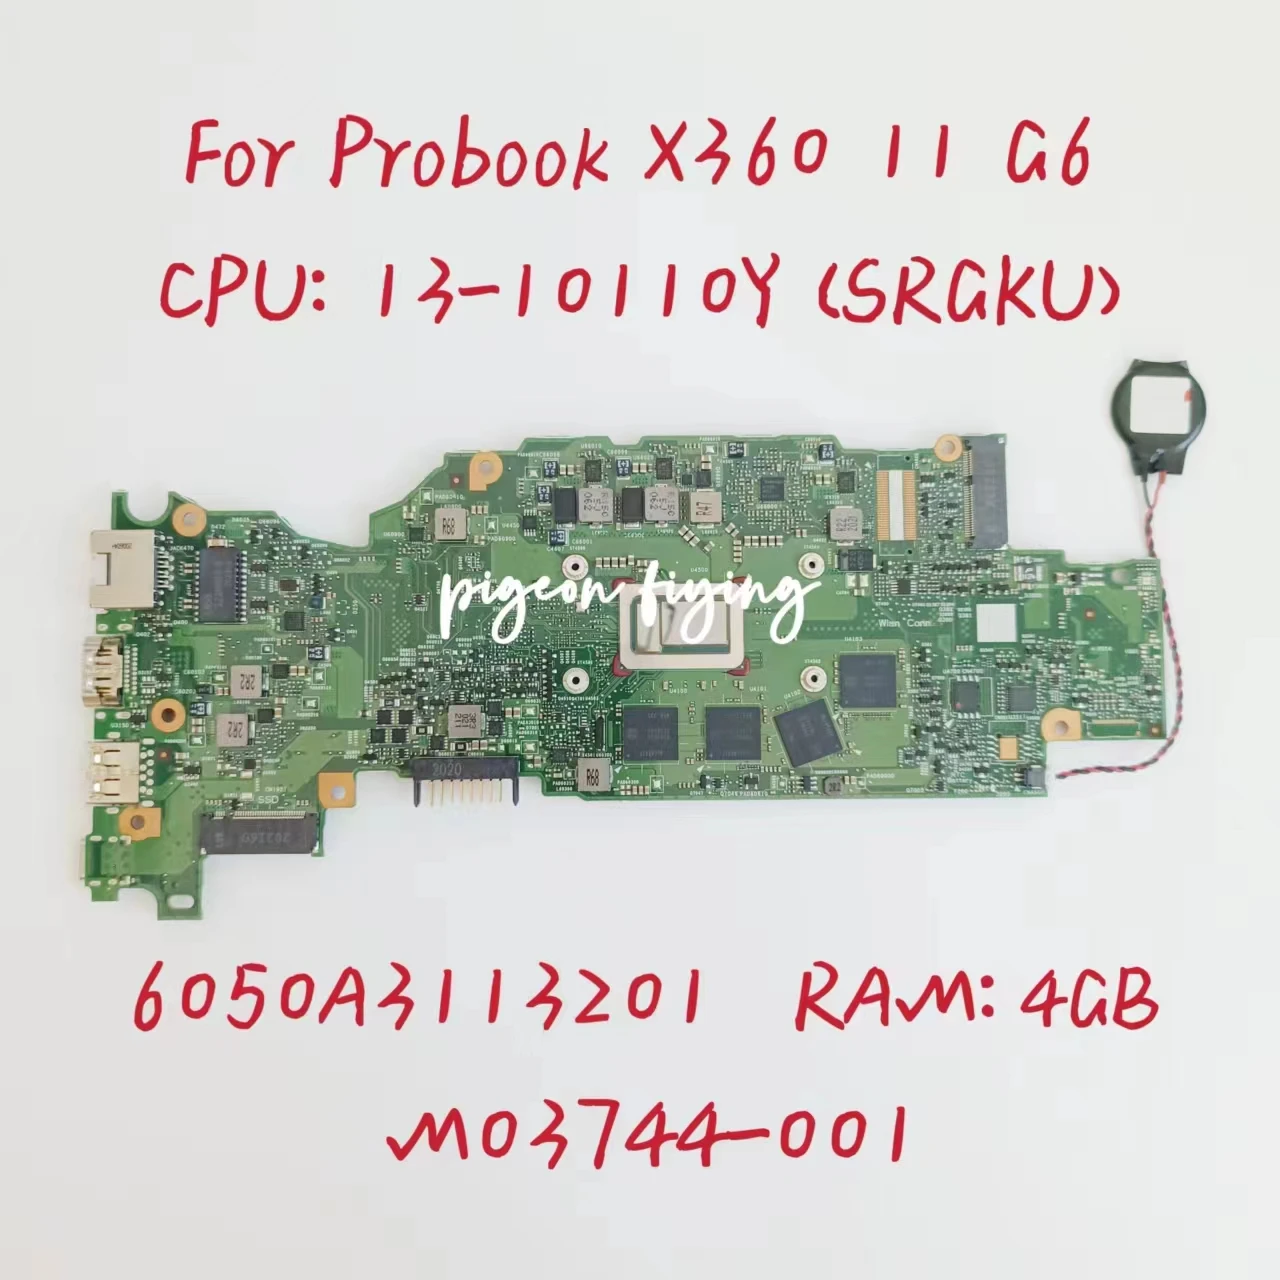 

6050A3113201 Mainboard For HP ProBook X360 11 G6 Laptop Motherboard CPU: I3-10110Y SRGKU RAM : 4GB DDR4 M03744-001 Test OK